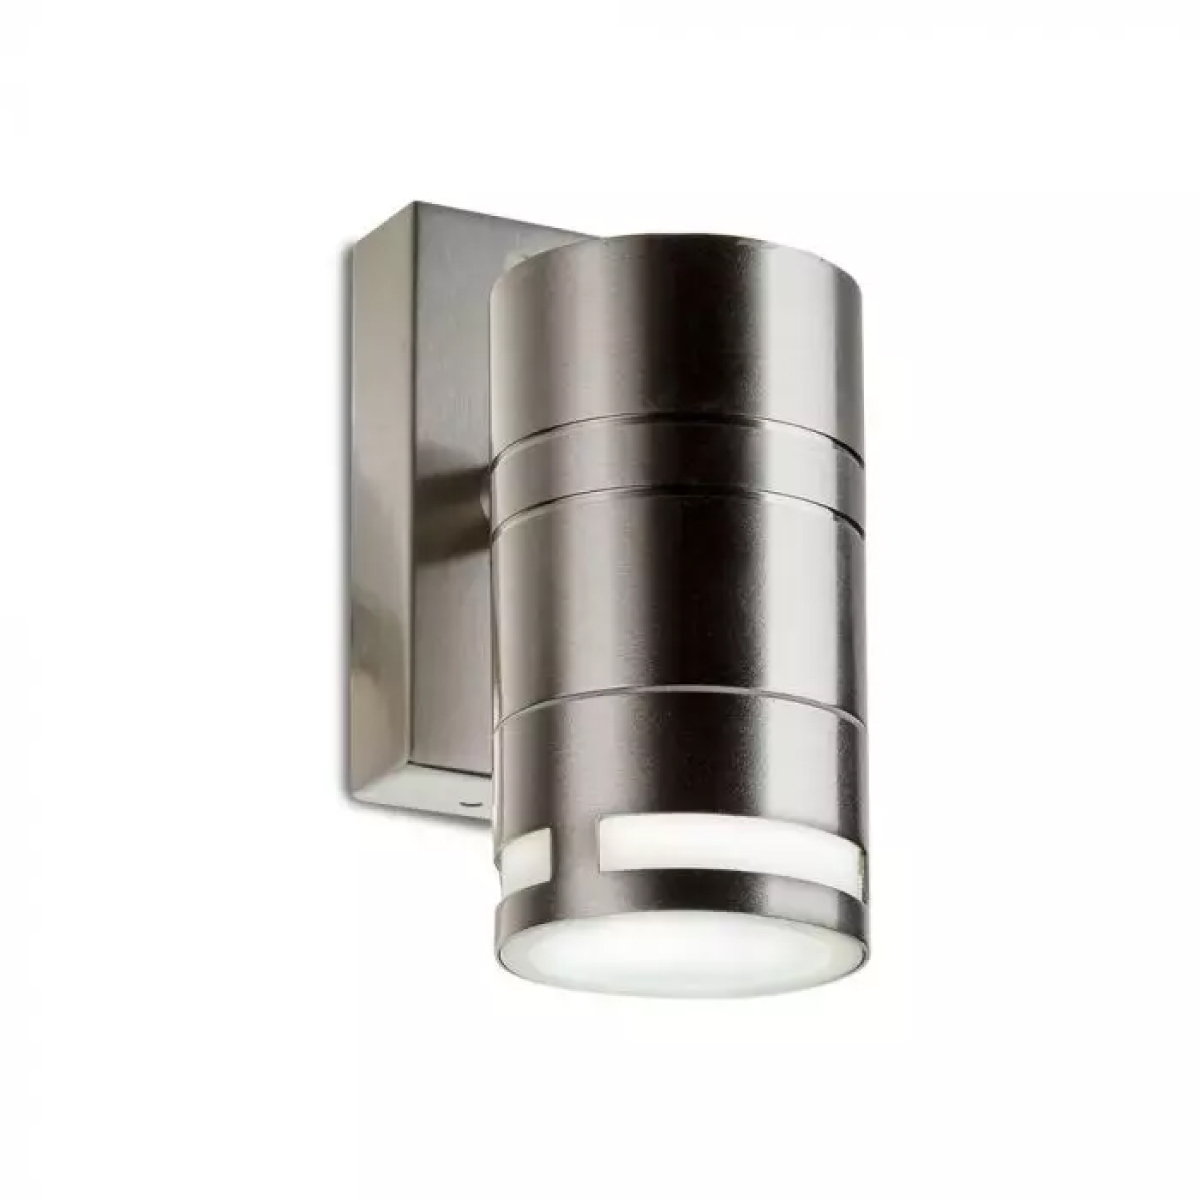 View GU10 Wall Light Fitting Stainless Steel IP44 information